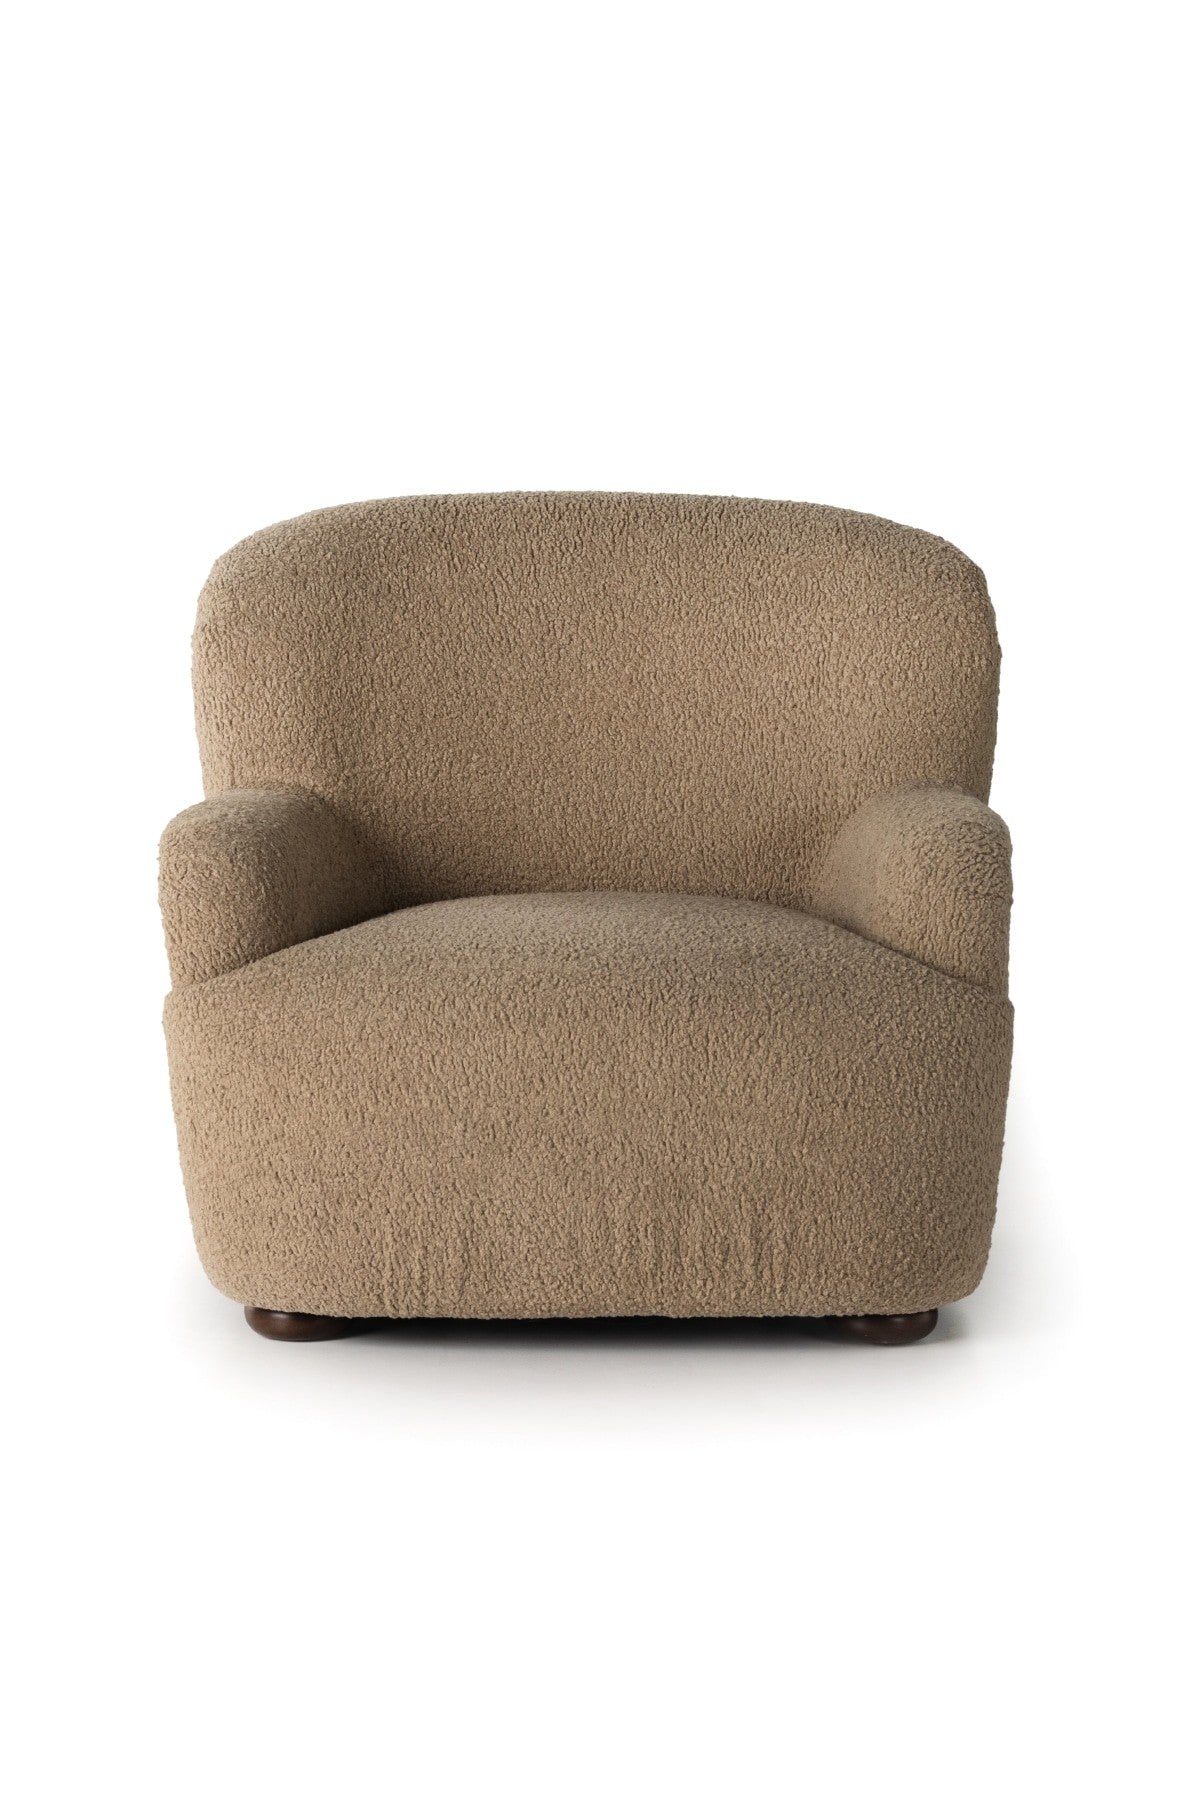 Stellina Chair - 2 Colors